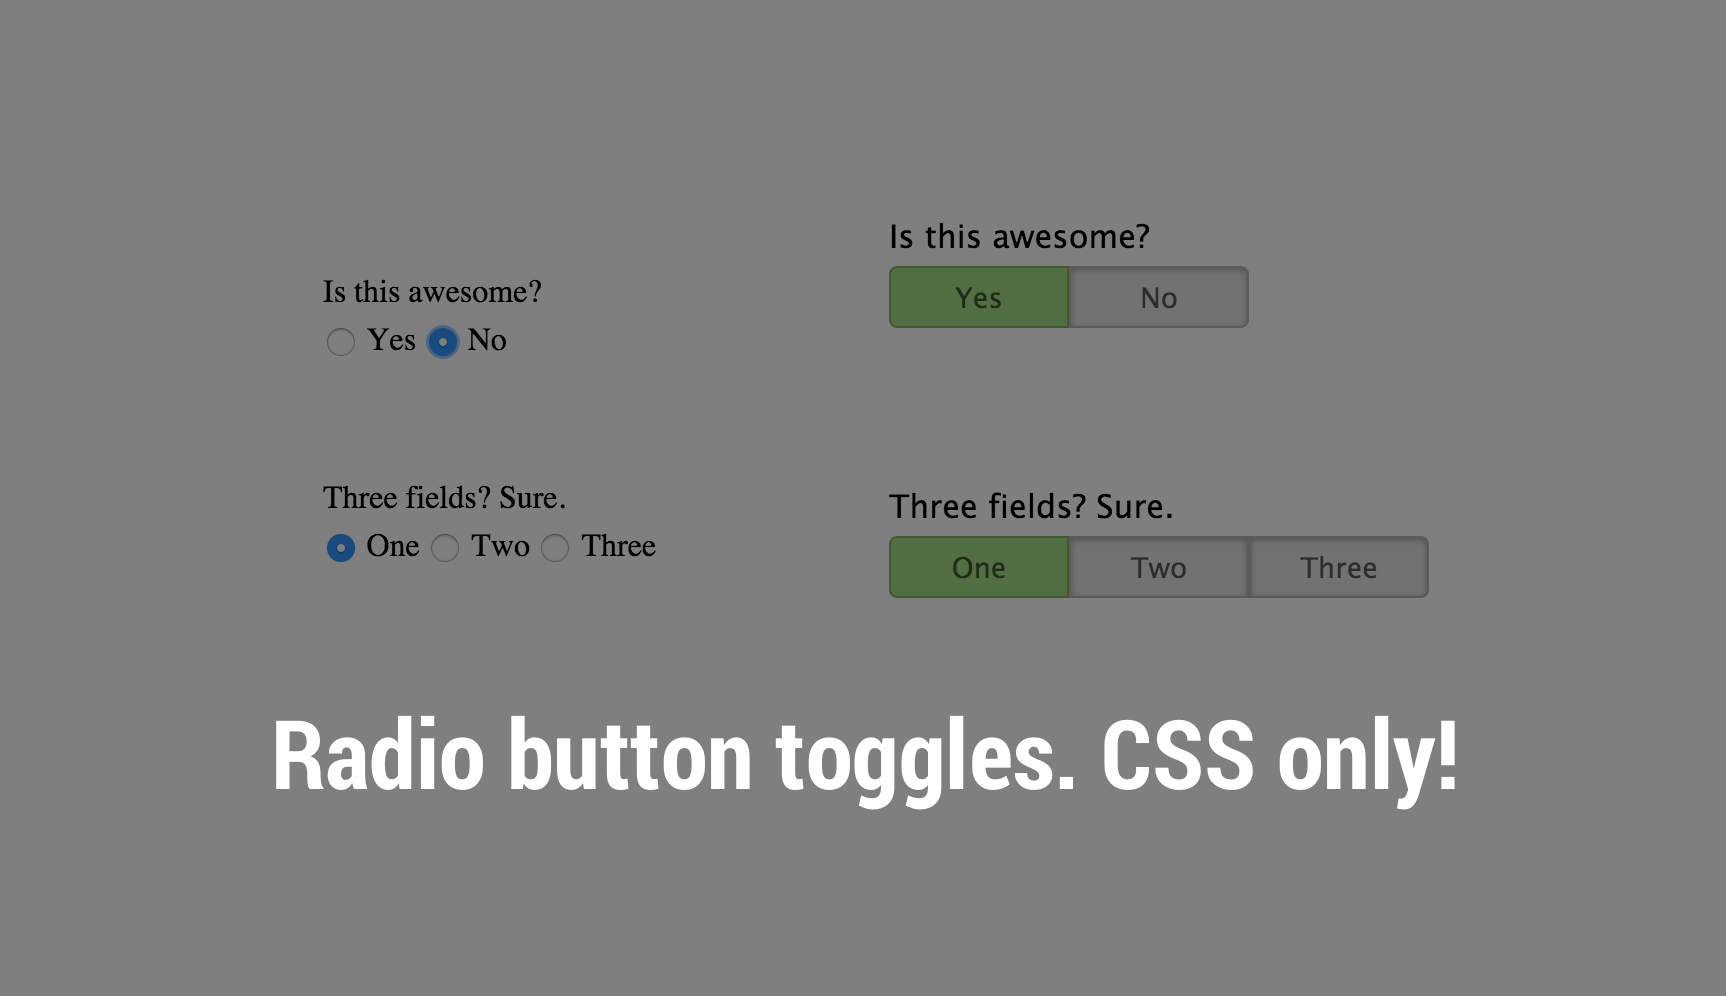 pint kapsel Erhvervelse Radio buttons as toggle buttons with CSS - The Stiz Media, LLC